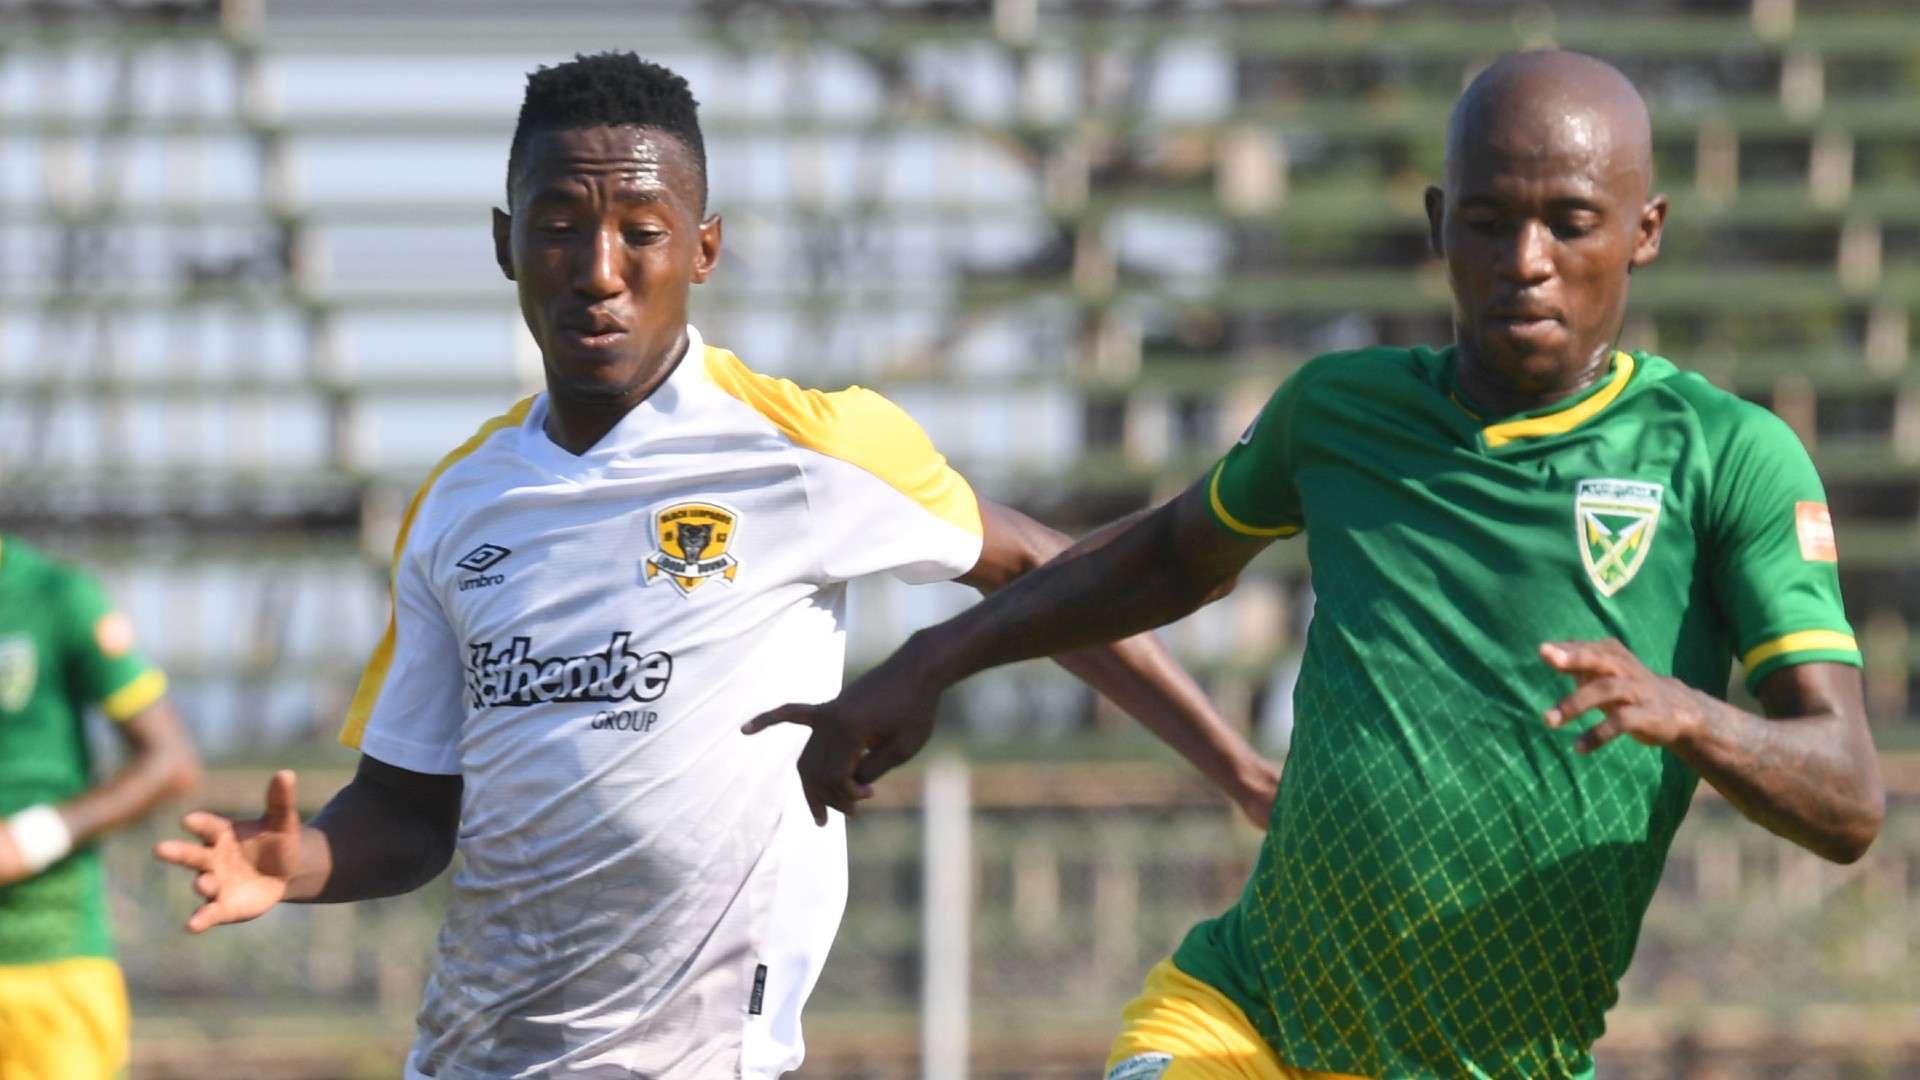 Nduduzo Sibiya of Golden Arrows challenged by Tumelo Khutlang of Black Leopards, March 2021